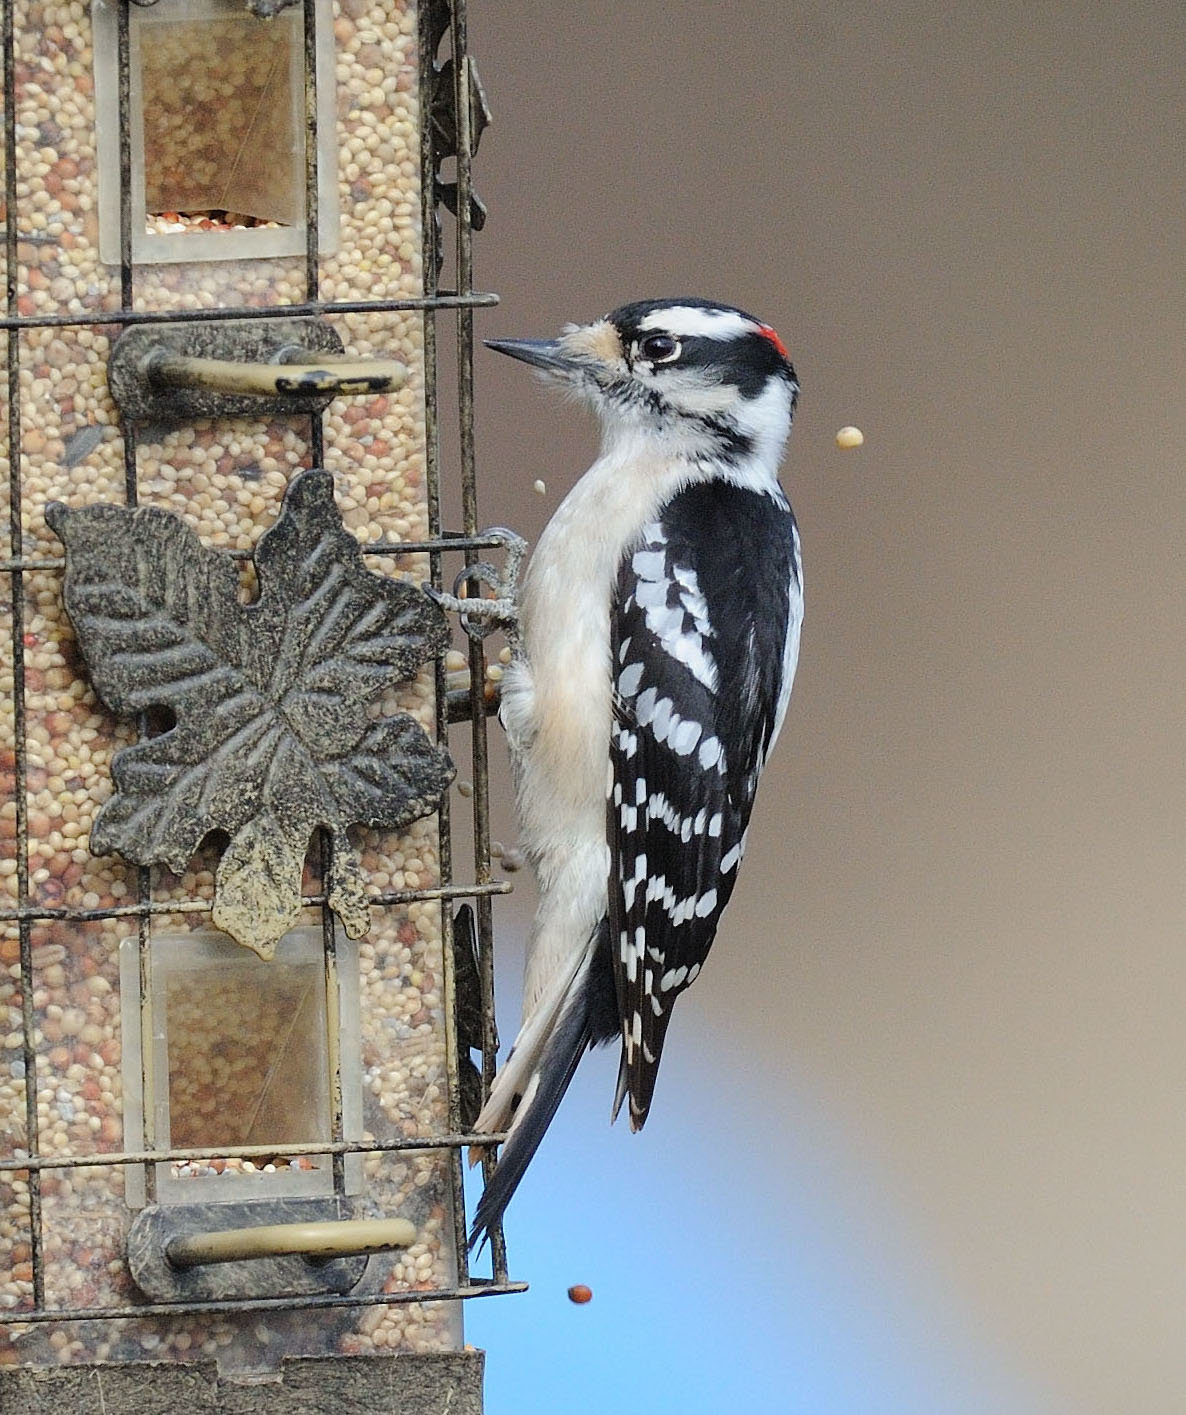 Downy woodpeckers will likely be the most seen woodpecker around feeders. Suet feeders are favorites of several species of woodpeckers. They are the smallest species and closely resemble the hairy woodpecker, which is a little larger, has a longer bill and does not have spots on the outmost of its tail feathers as the downy has. Visit www.riverreporter.com/river-talk to hear an audio clip of their rapid drum.